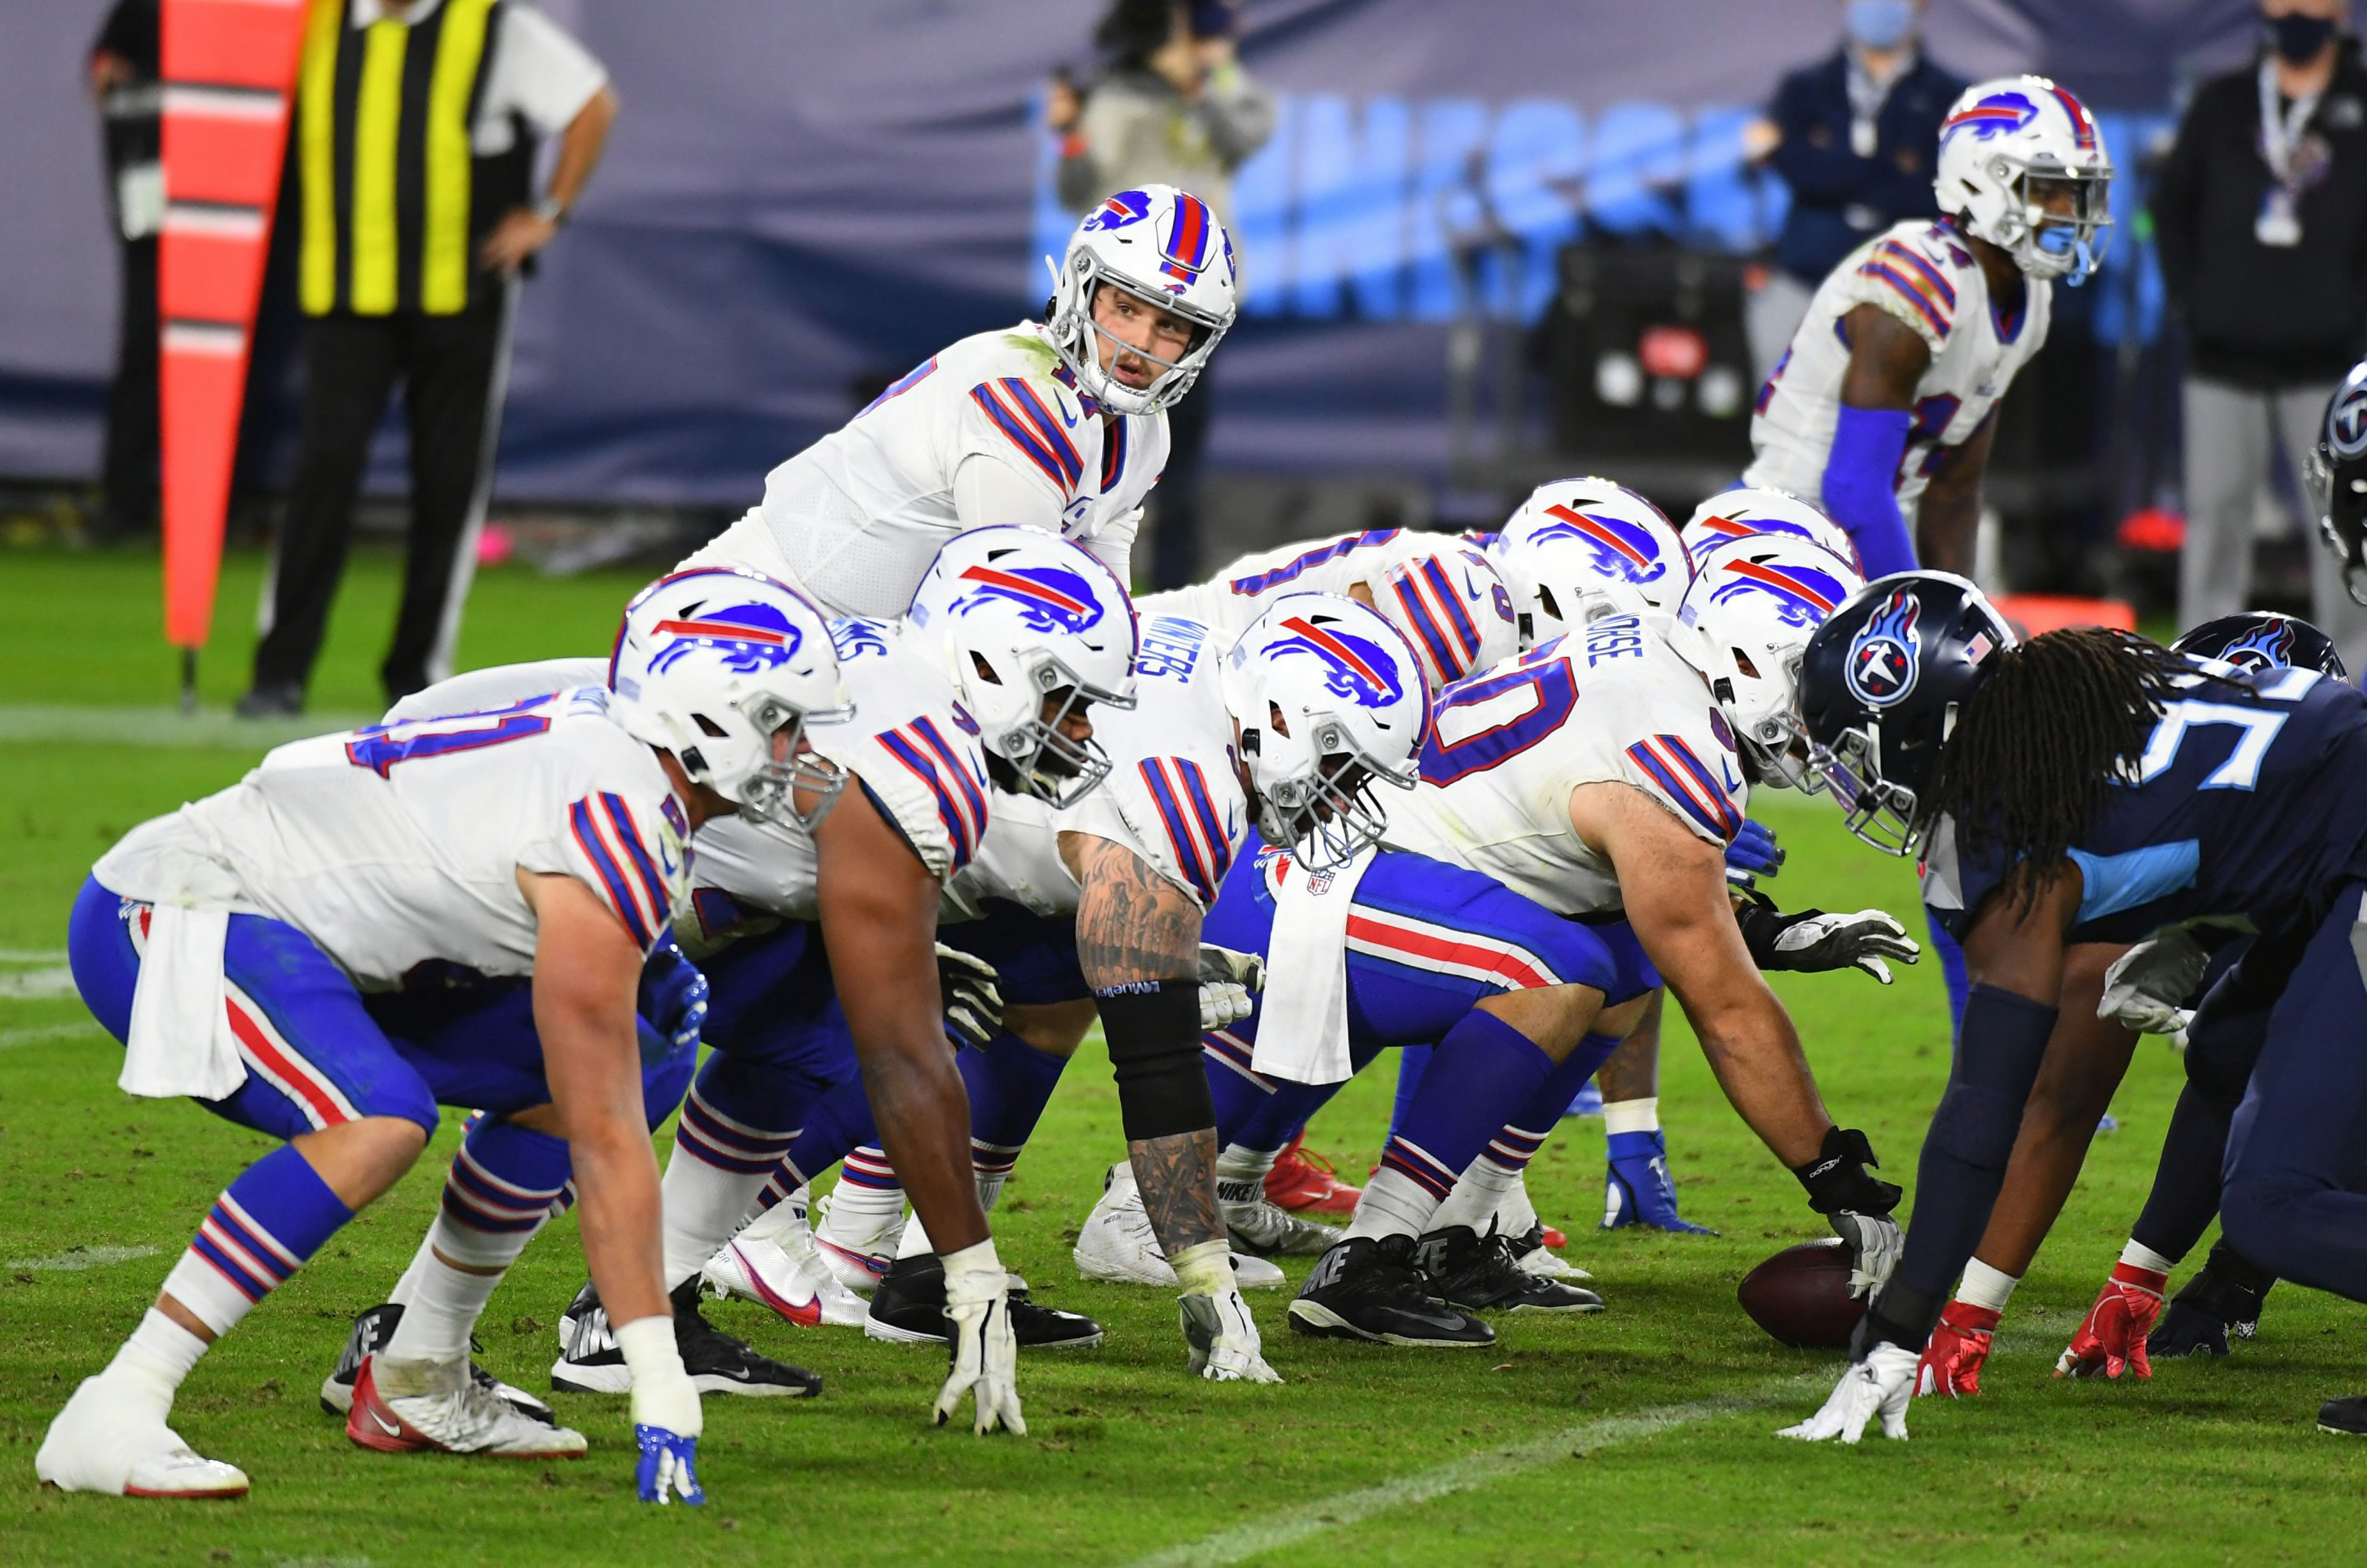 Ranking the Buffalo Bills among the best teams in the AFC after Week 10